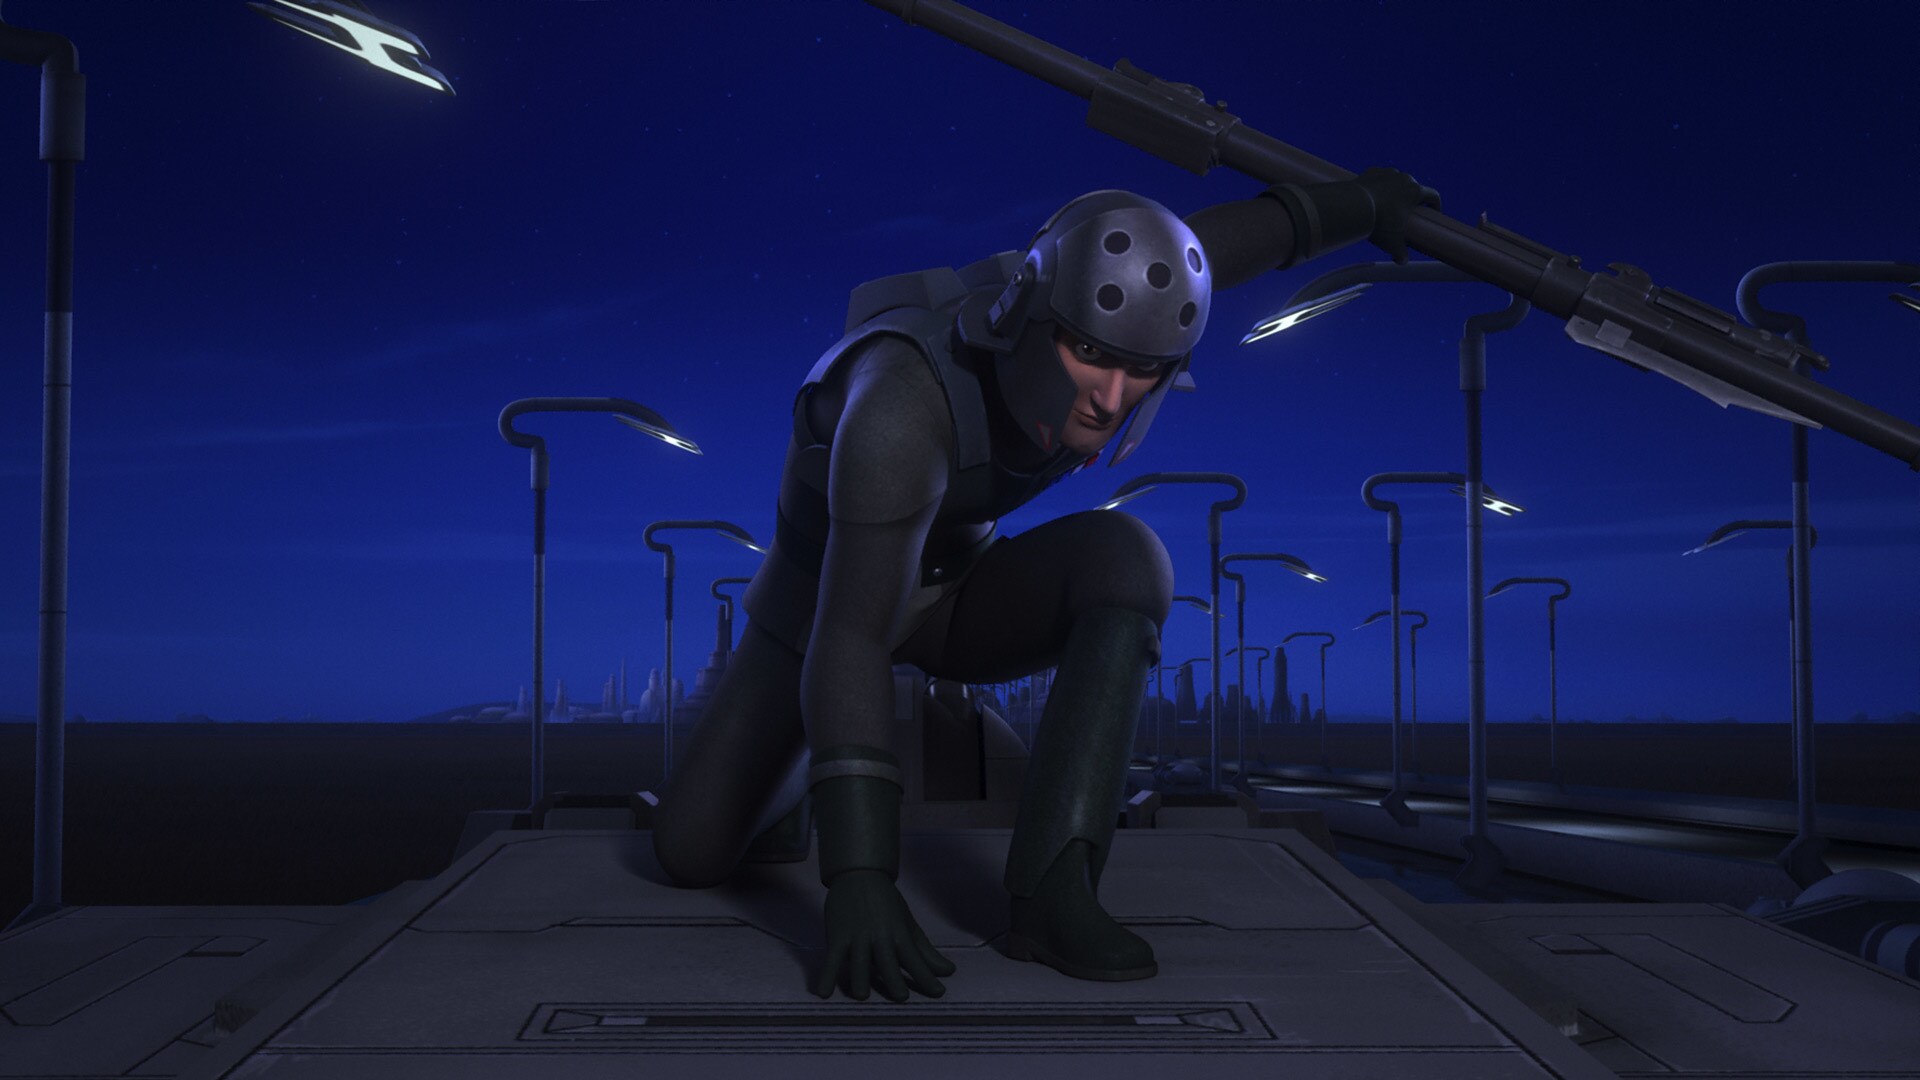 Star Wars Rebels: “Empire Day” Preview